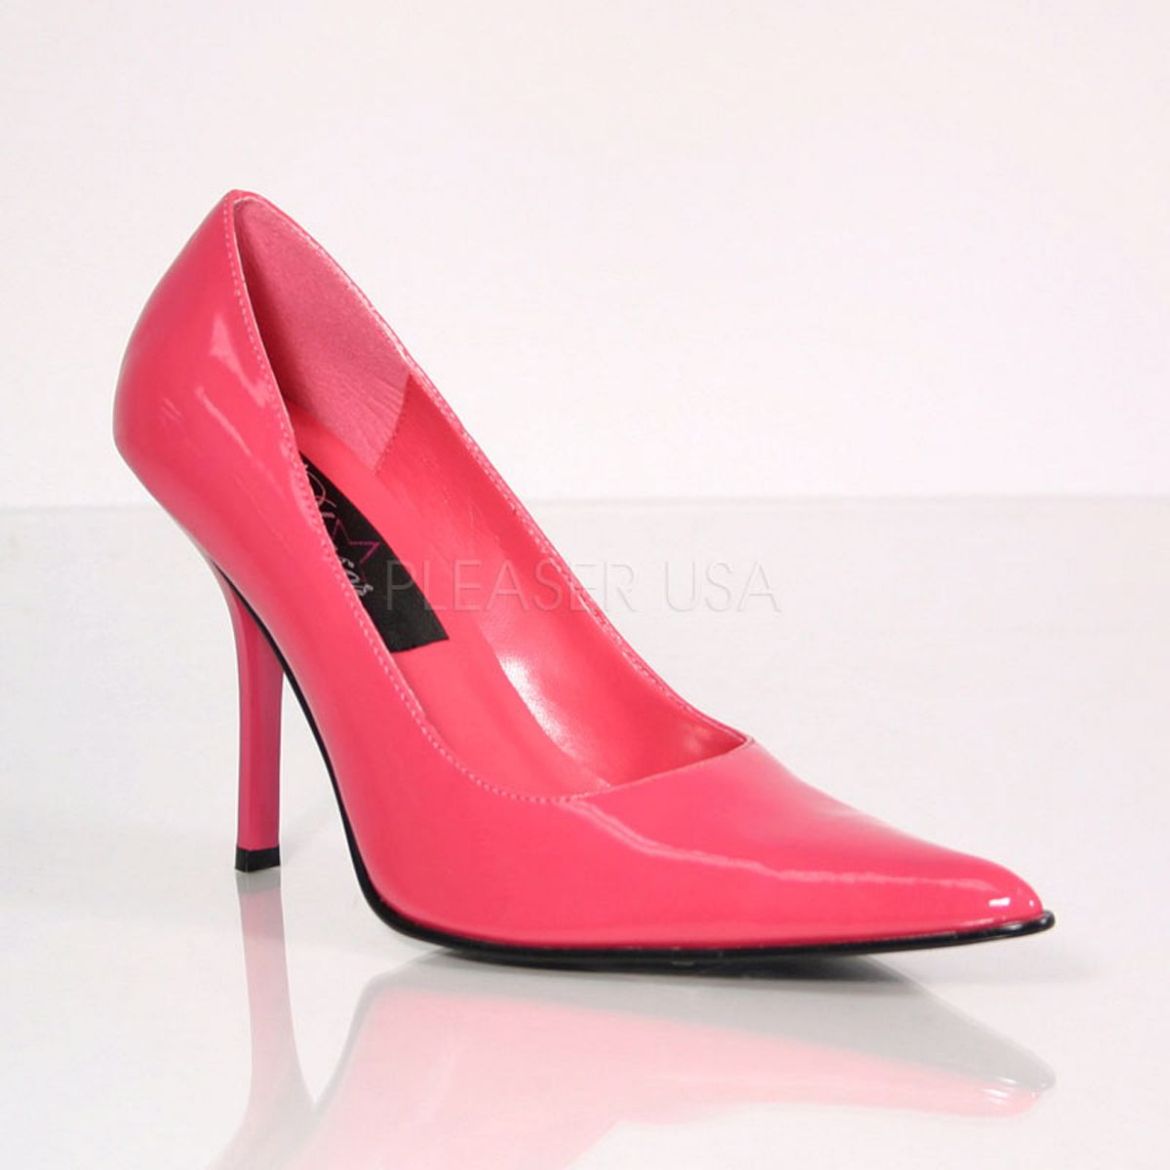 Product image of Pleaser FOXY-01 Fuchsia Patent 3 3/4 inch Stiletto Heel Shoes